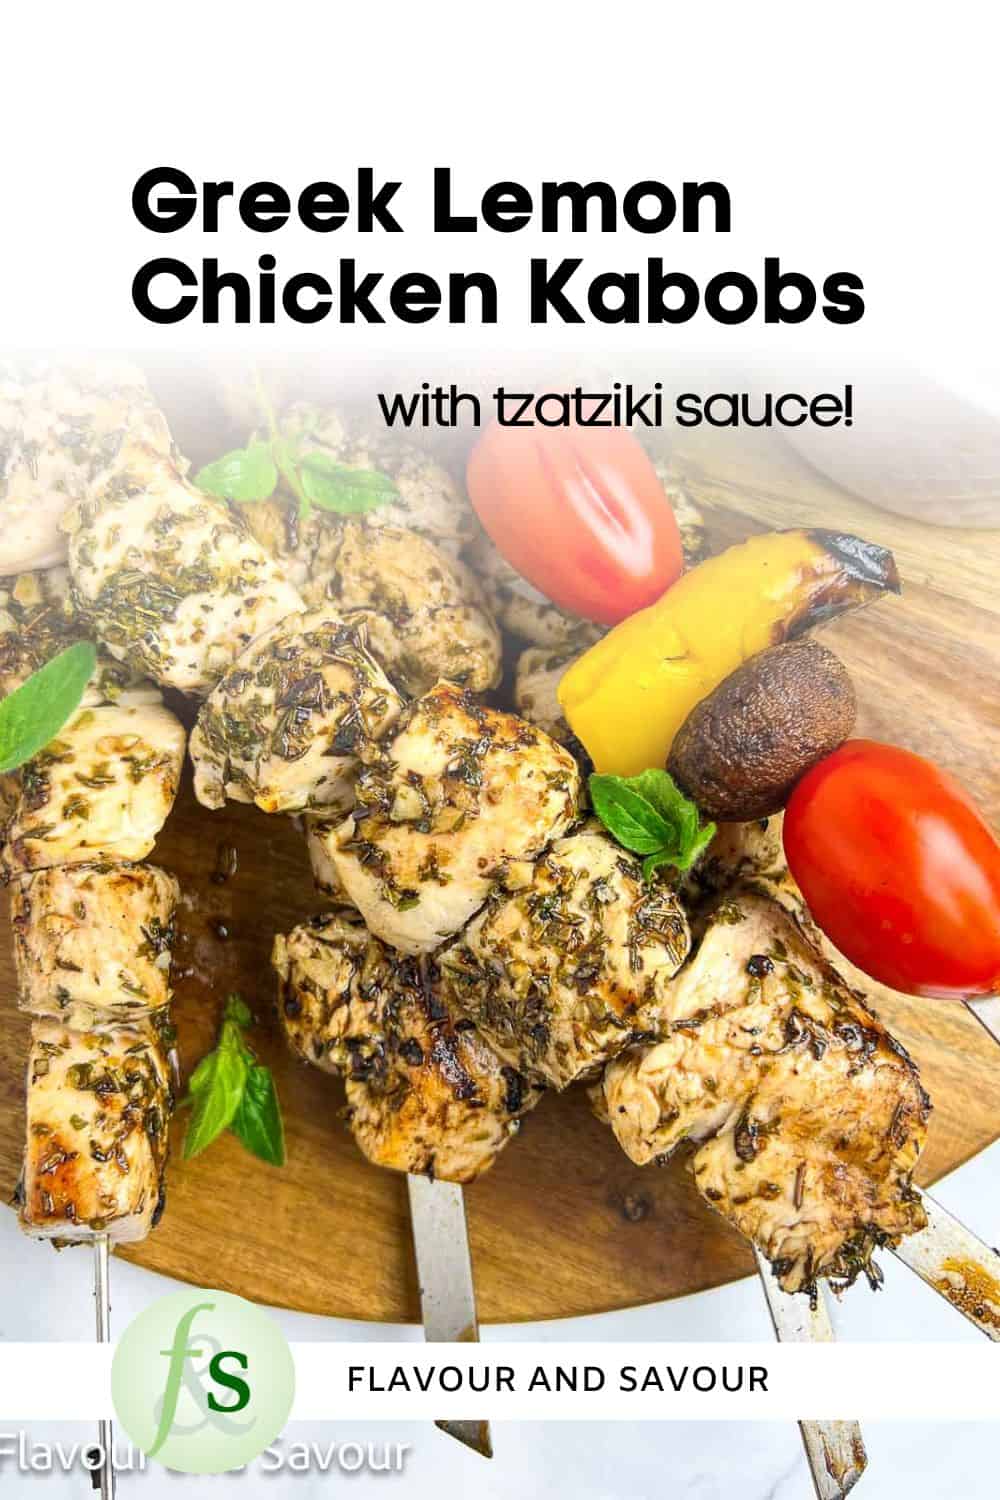 Image with text for Greek Lemon Chicken Kabobs.